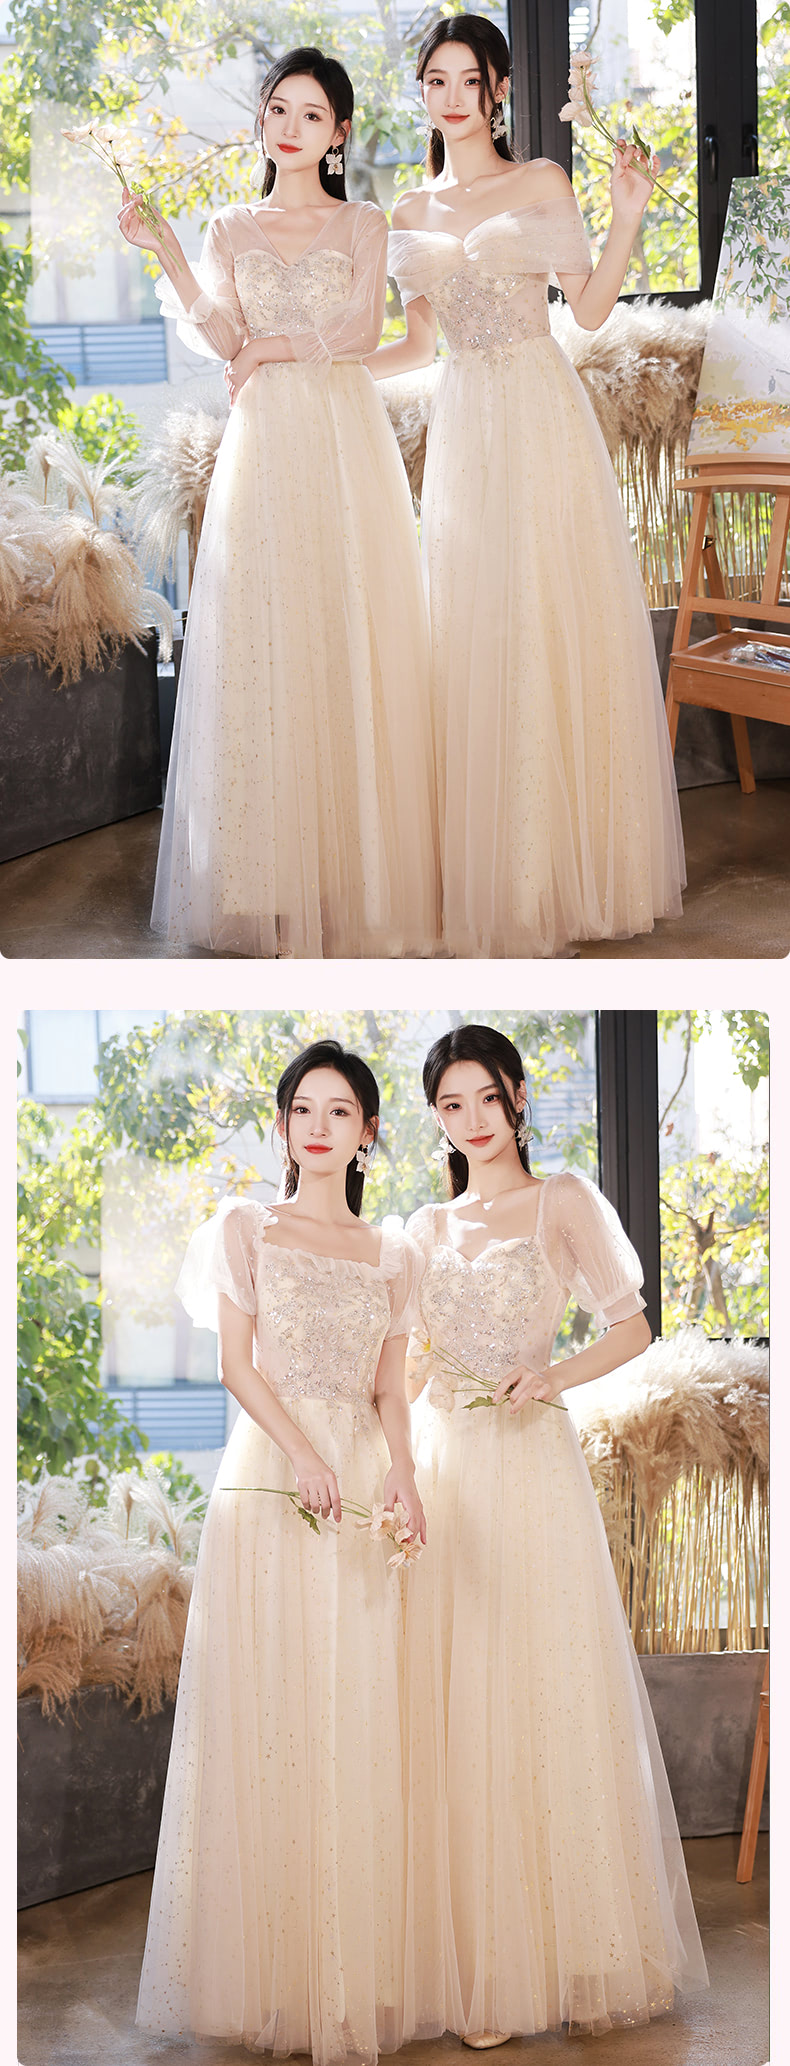 A-Line-Champagne-Sweet-Floral-Lace-Bridesmaid-Maxi-Evening-Dress13.jpg